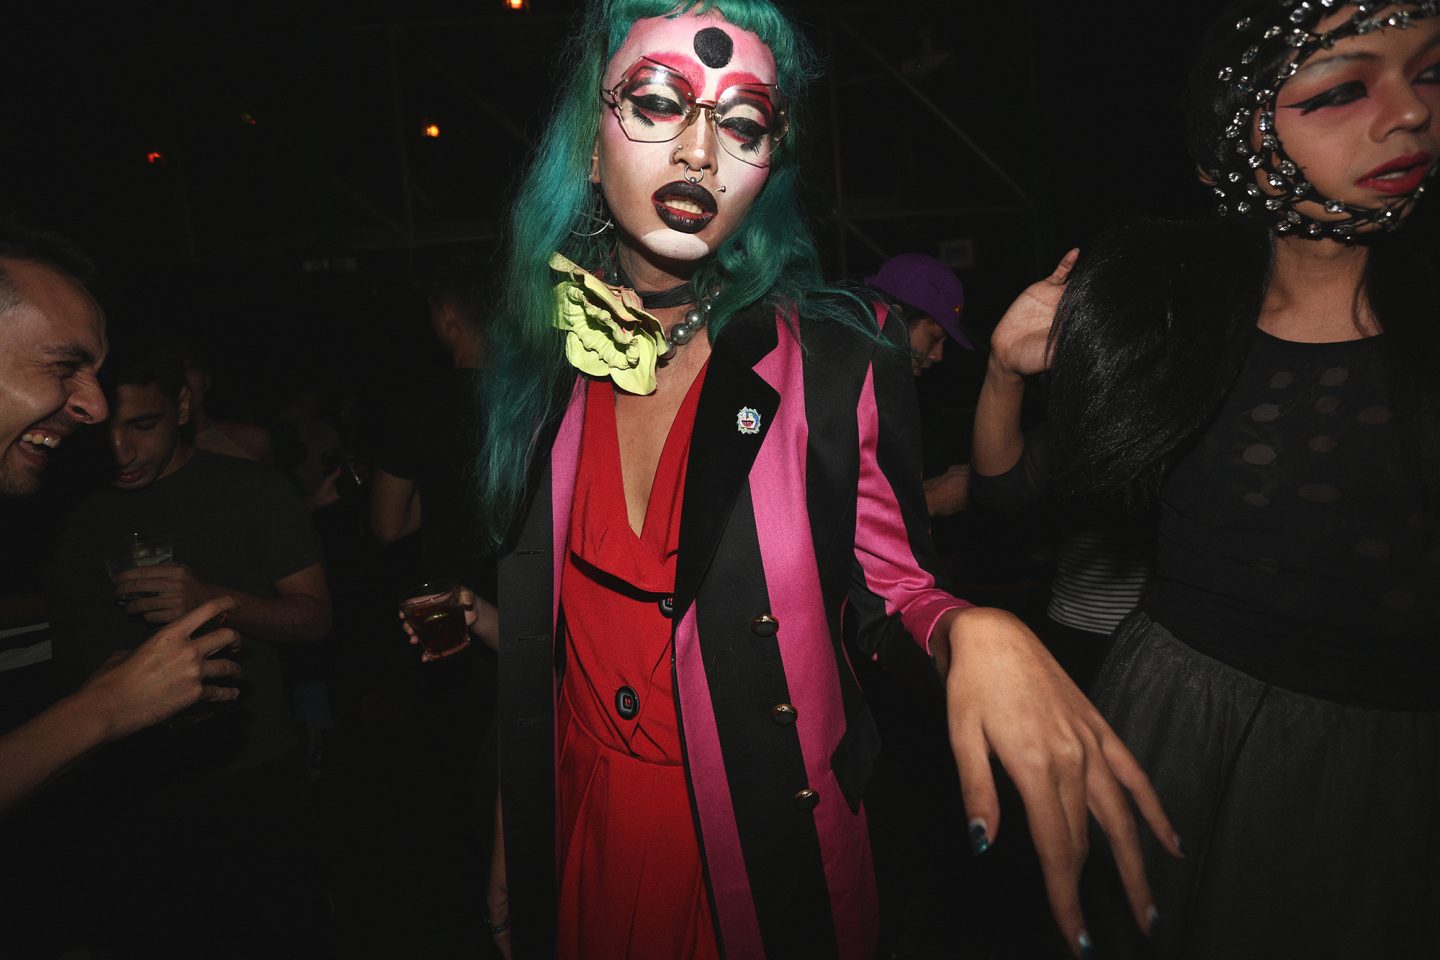 Filipino drag culture still persists and evolves as time goes by.